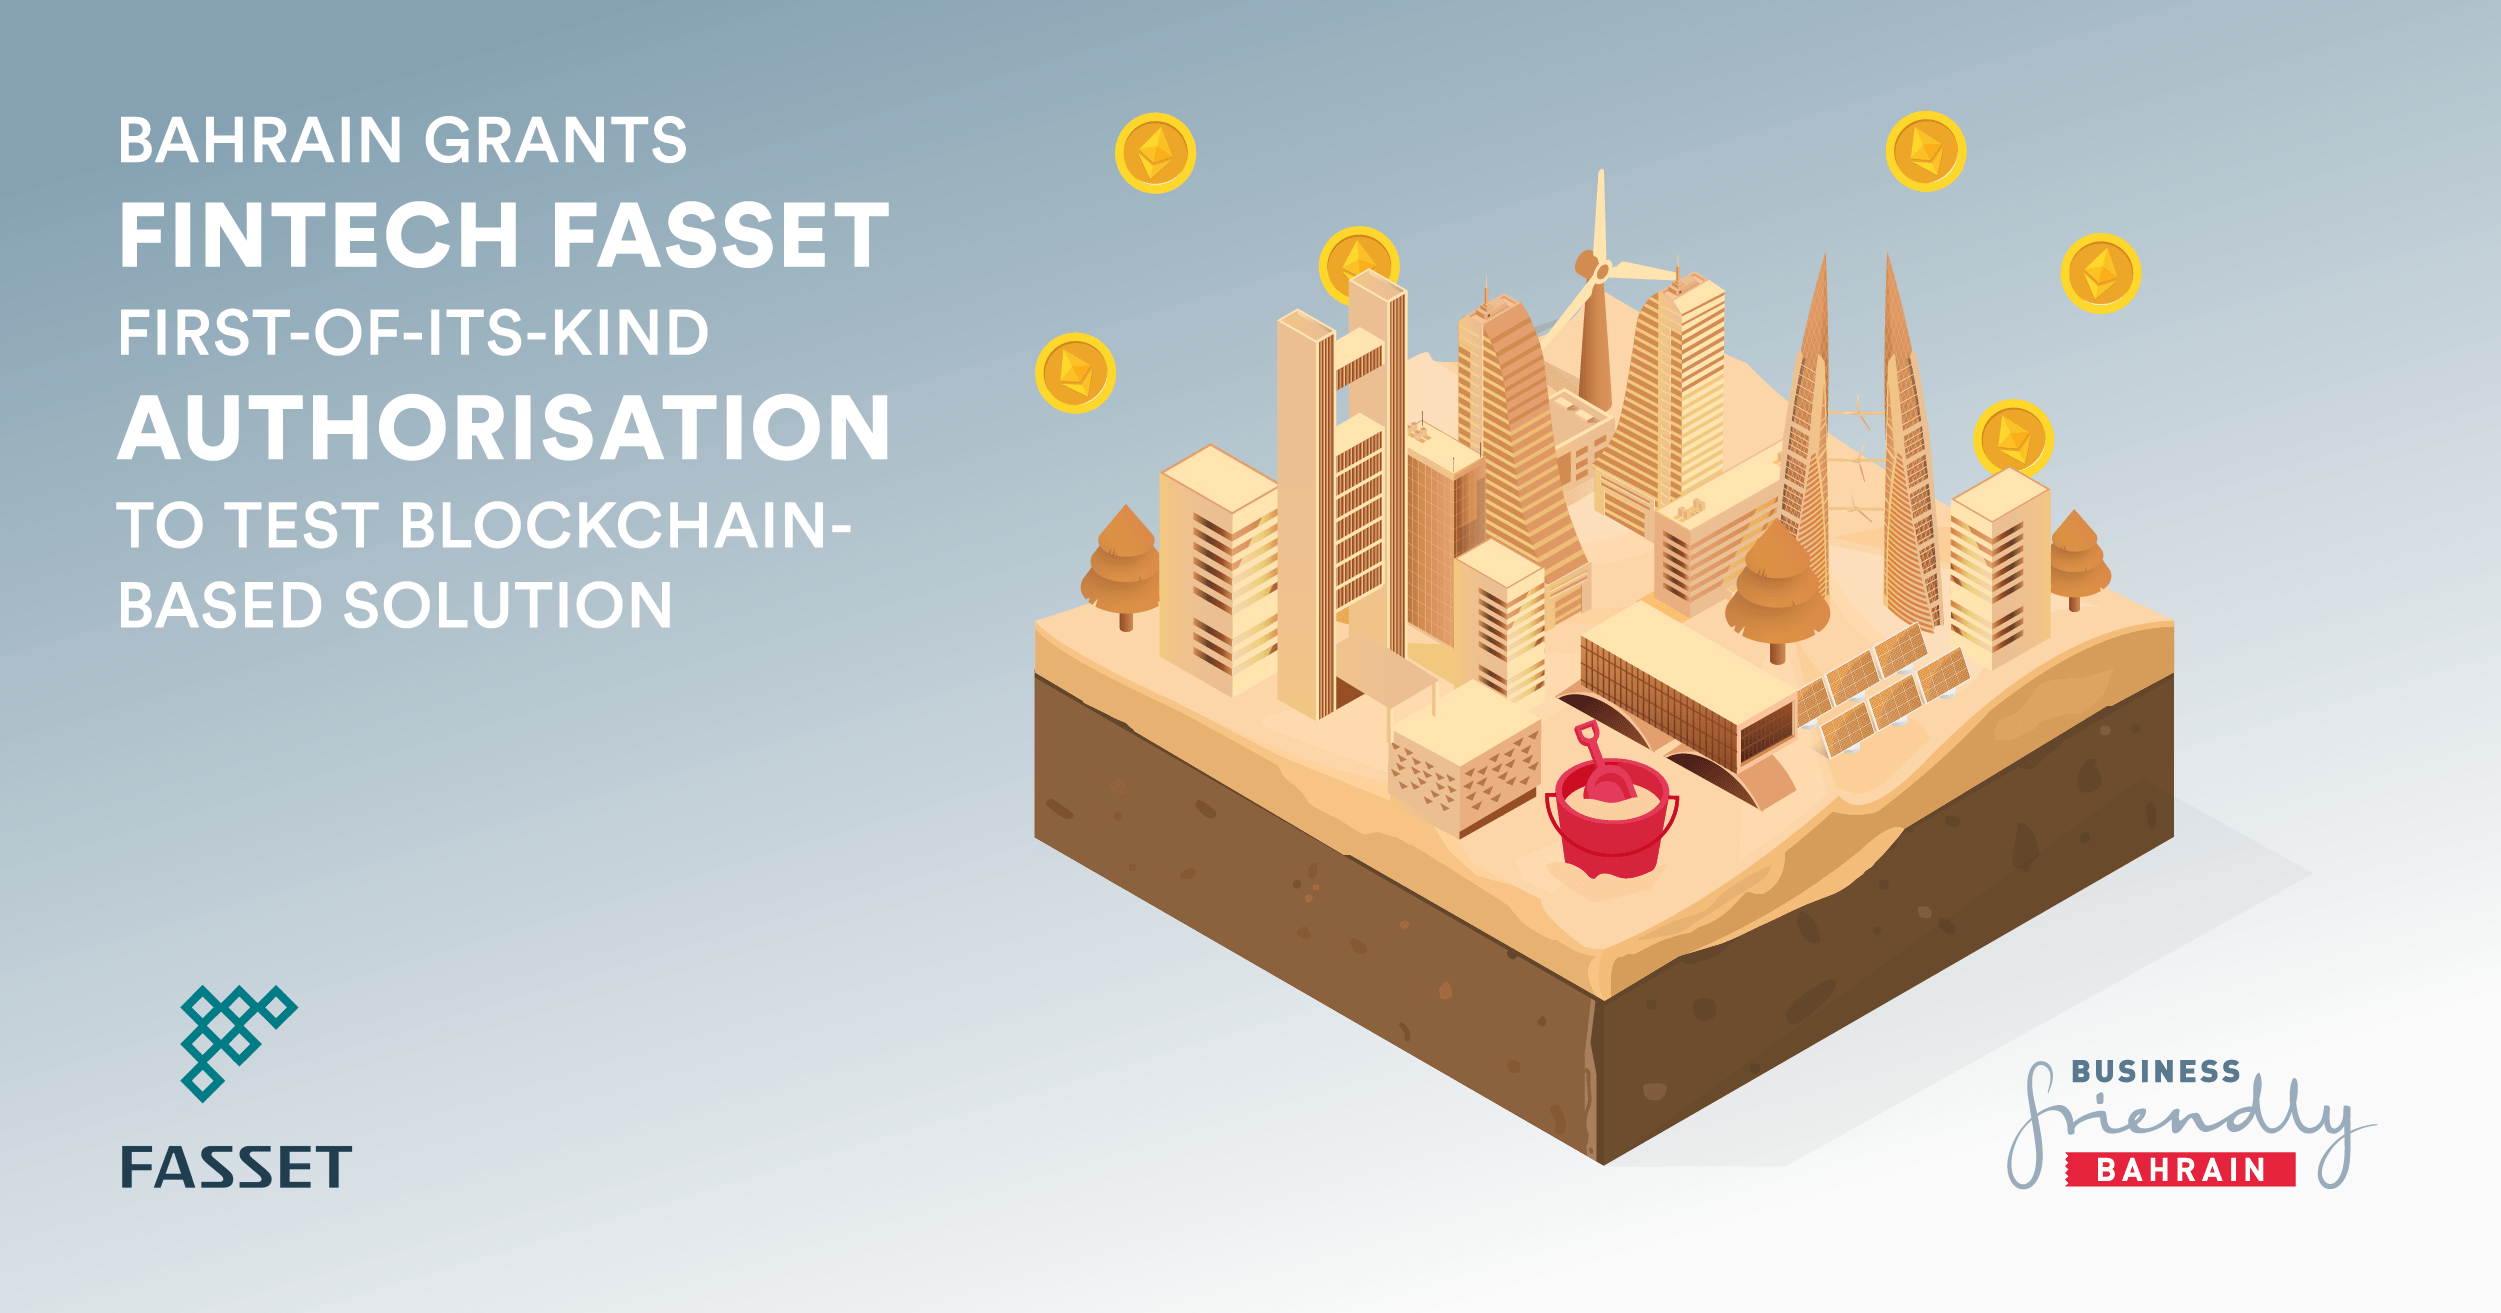 Bahrain grants UK FinTech Fasset first-of-its-kind authorisation to test blockchain-based solution for addressing US$ 15 trillion sustainable infrastructure funding gap